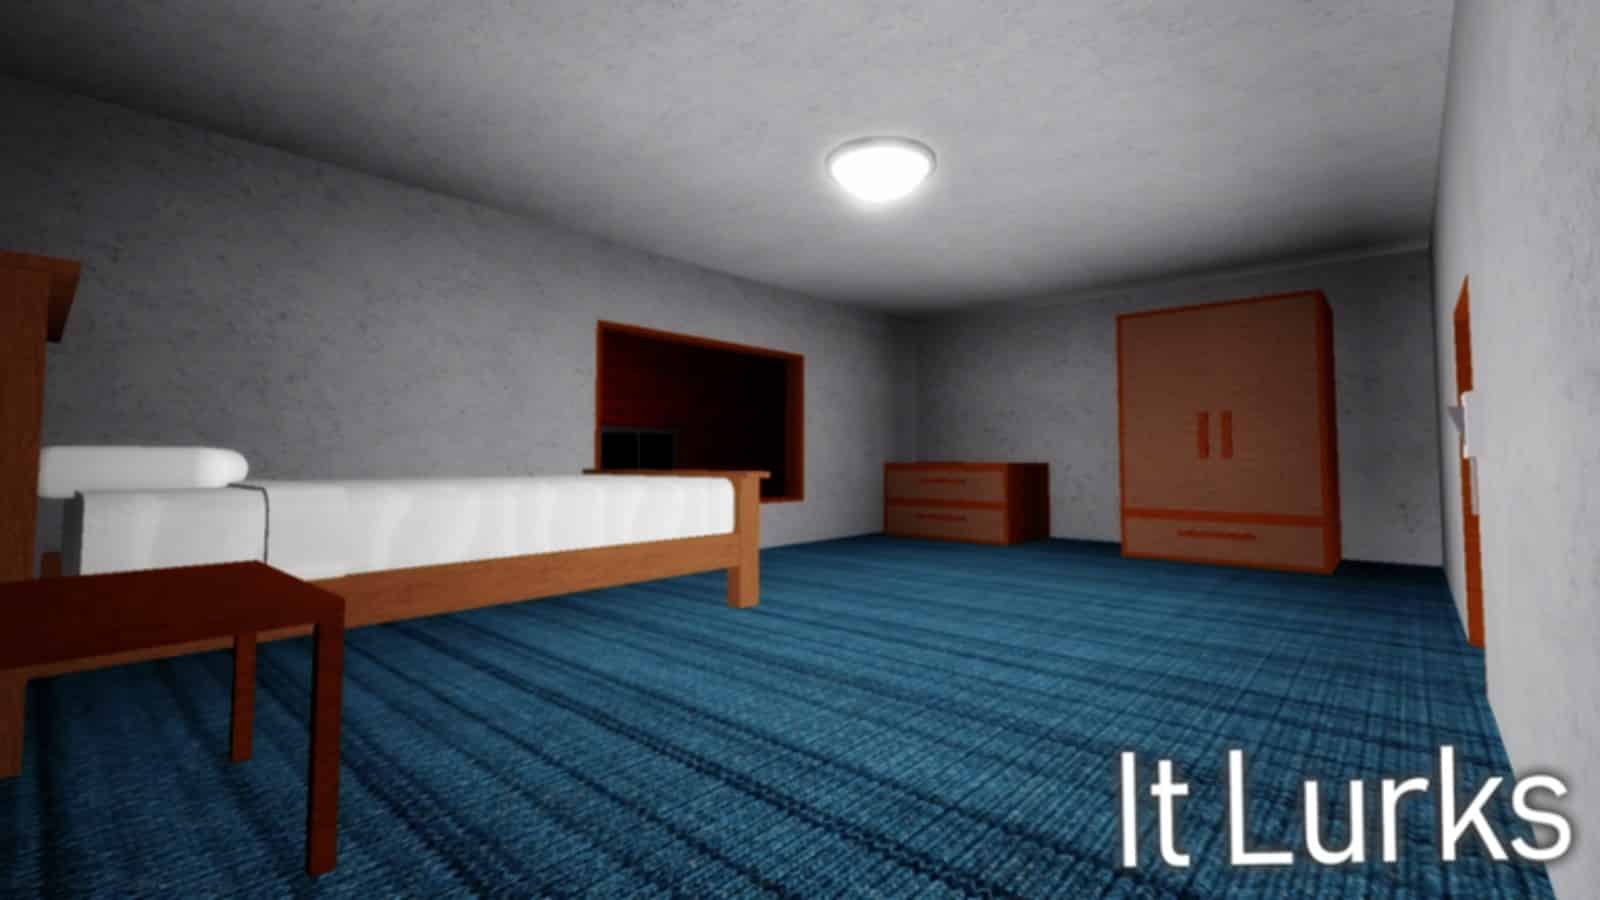 A screenshot from It Lurks the Roblox game